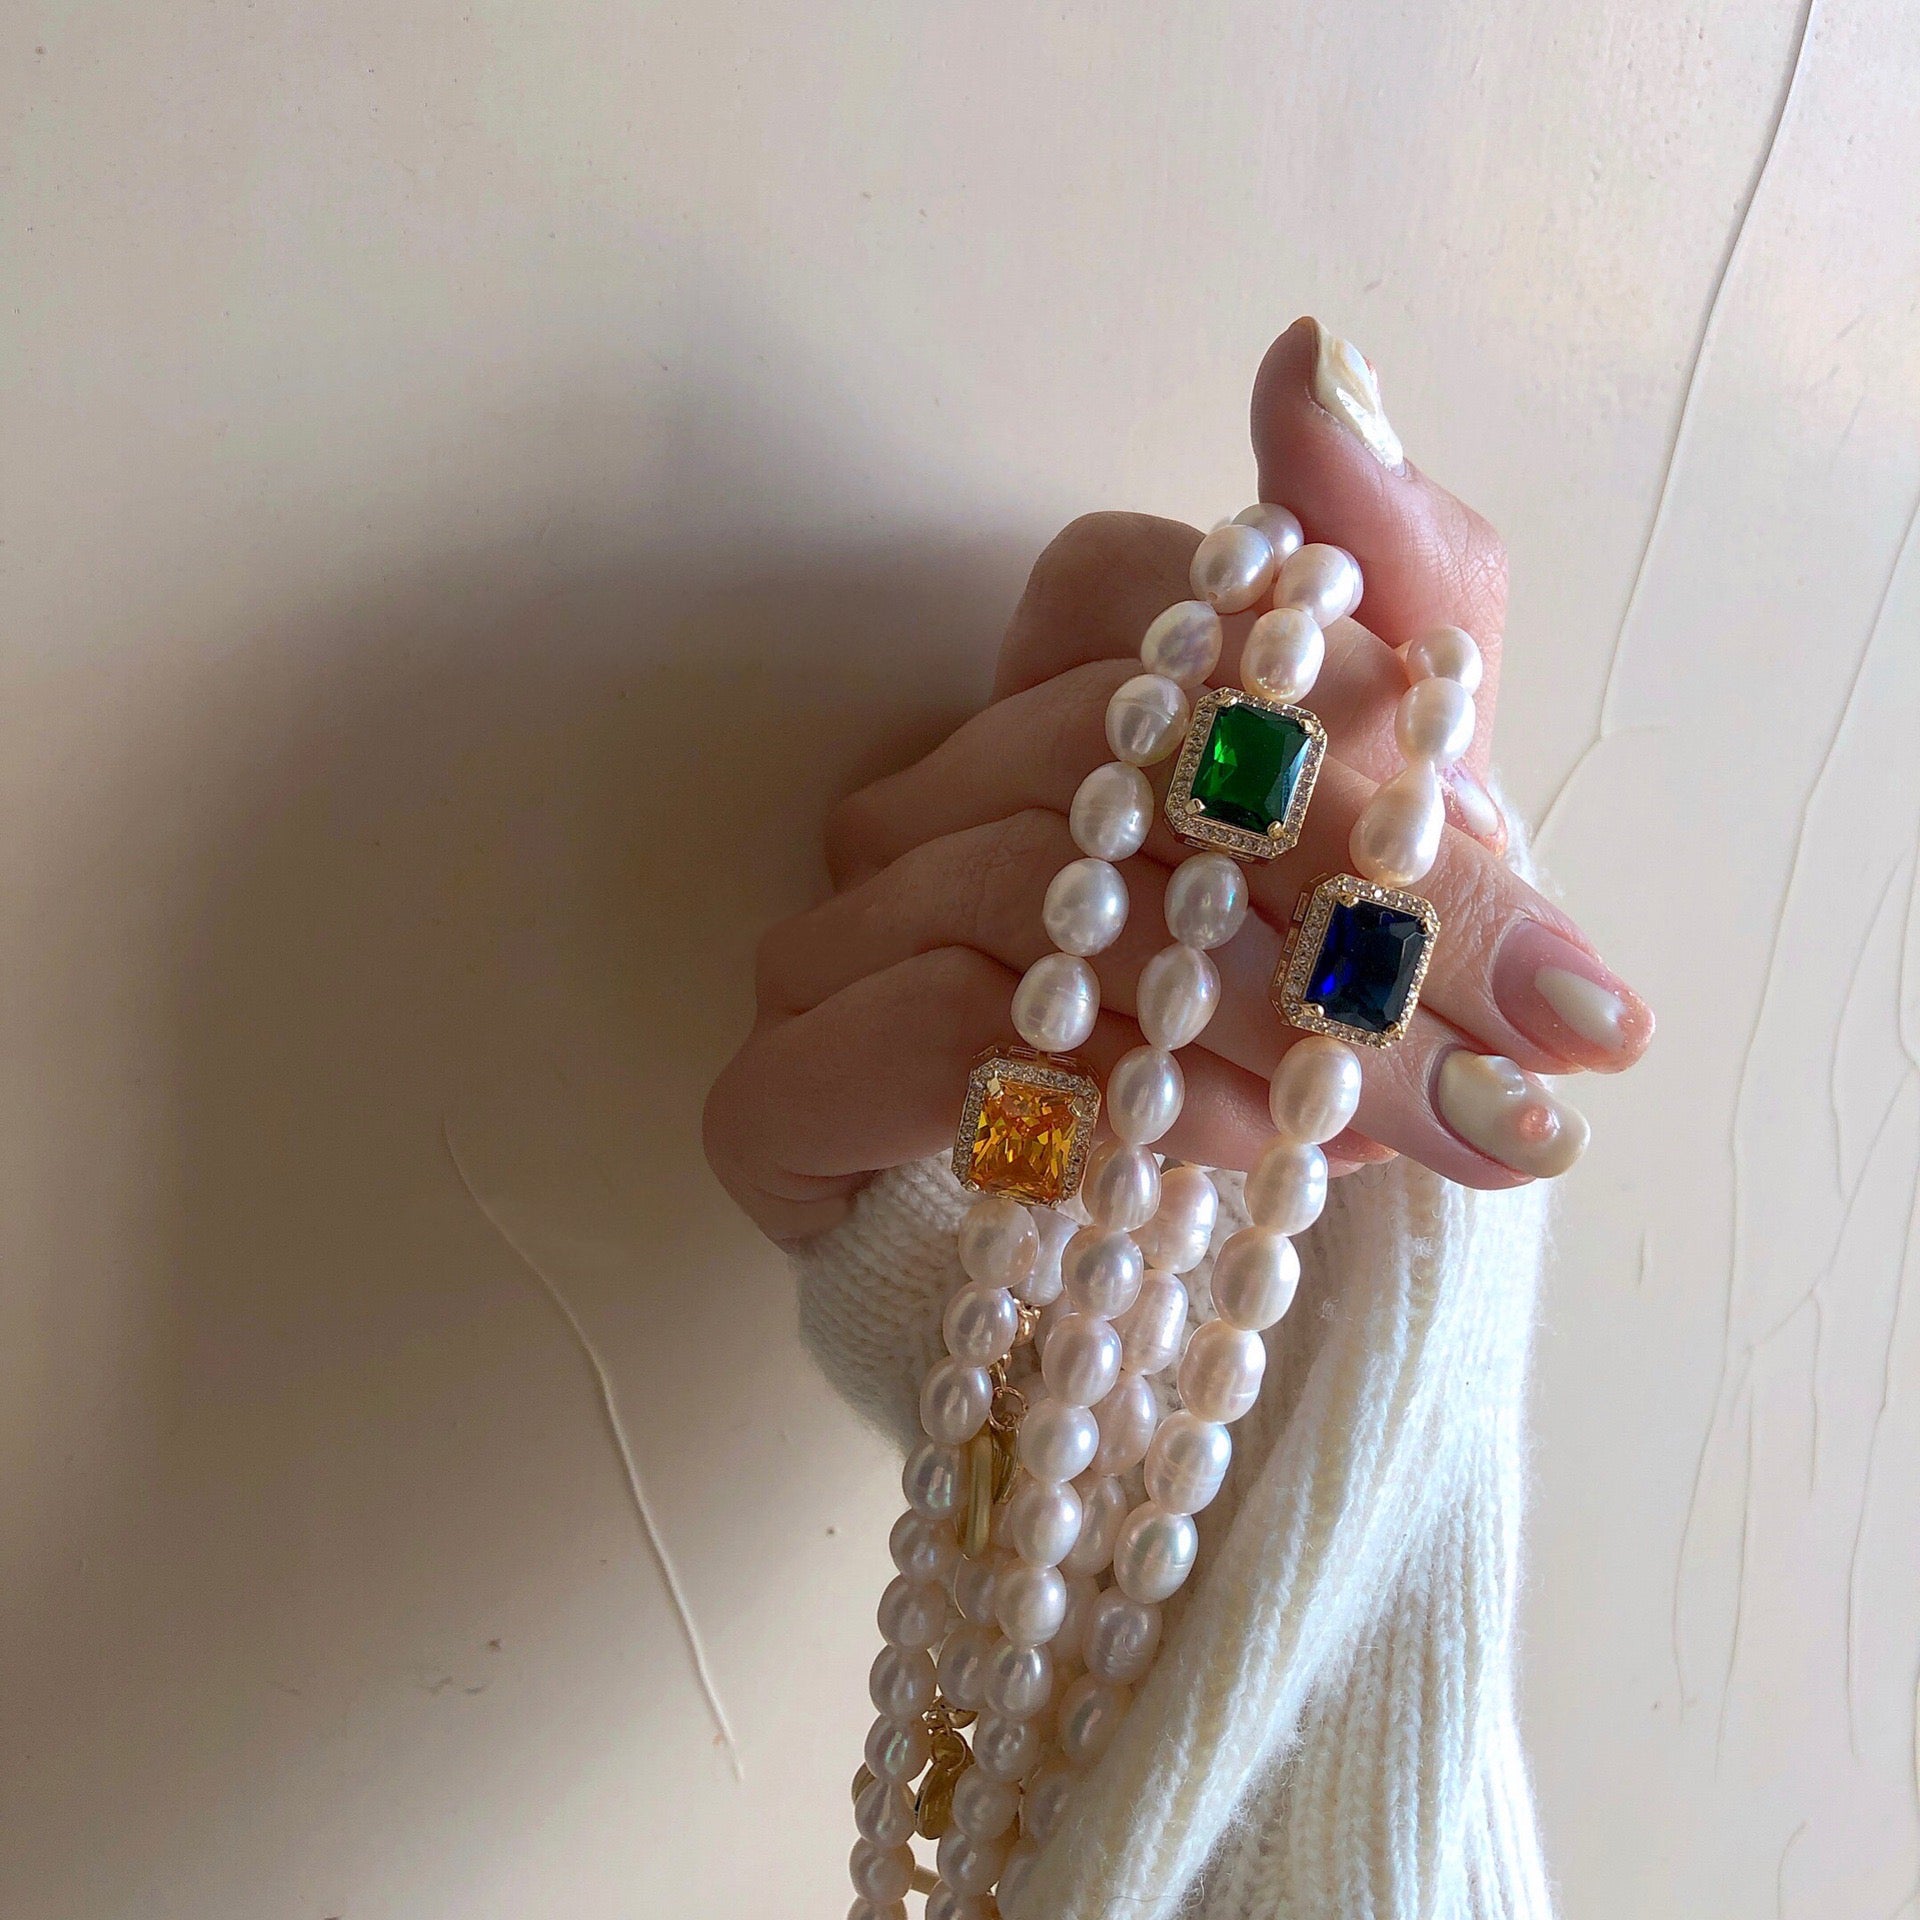 Female pearl gem necklace